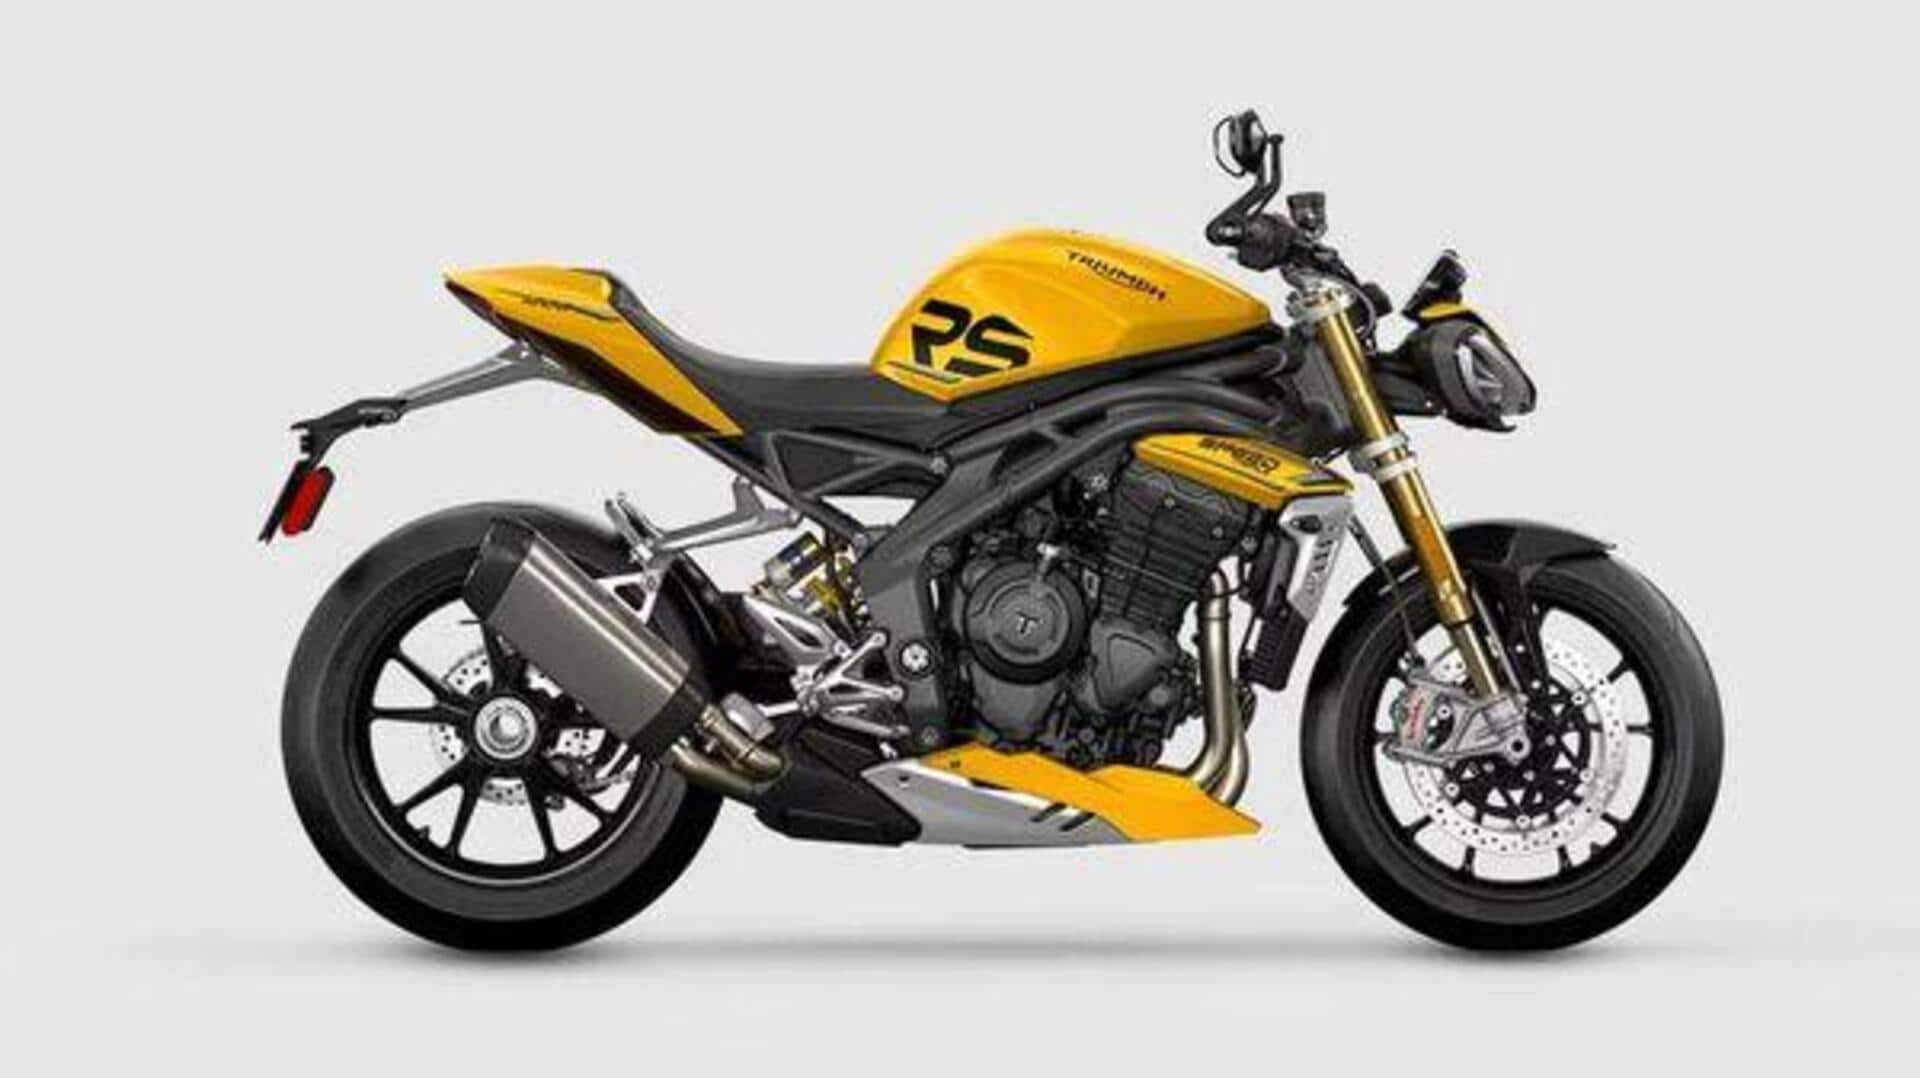 Triumph introduces new color option for Speed Triple 1200 RS